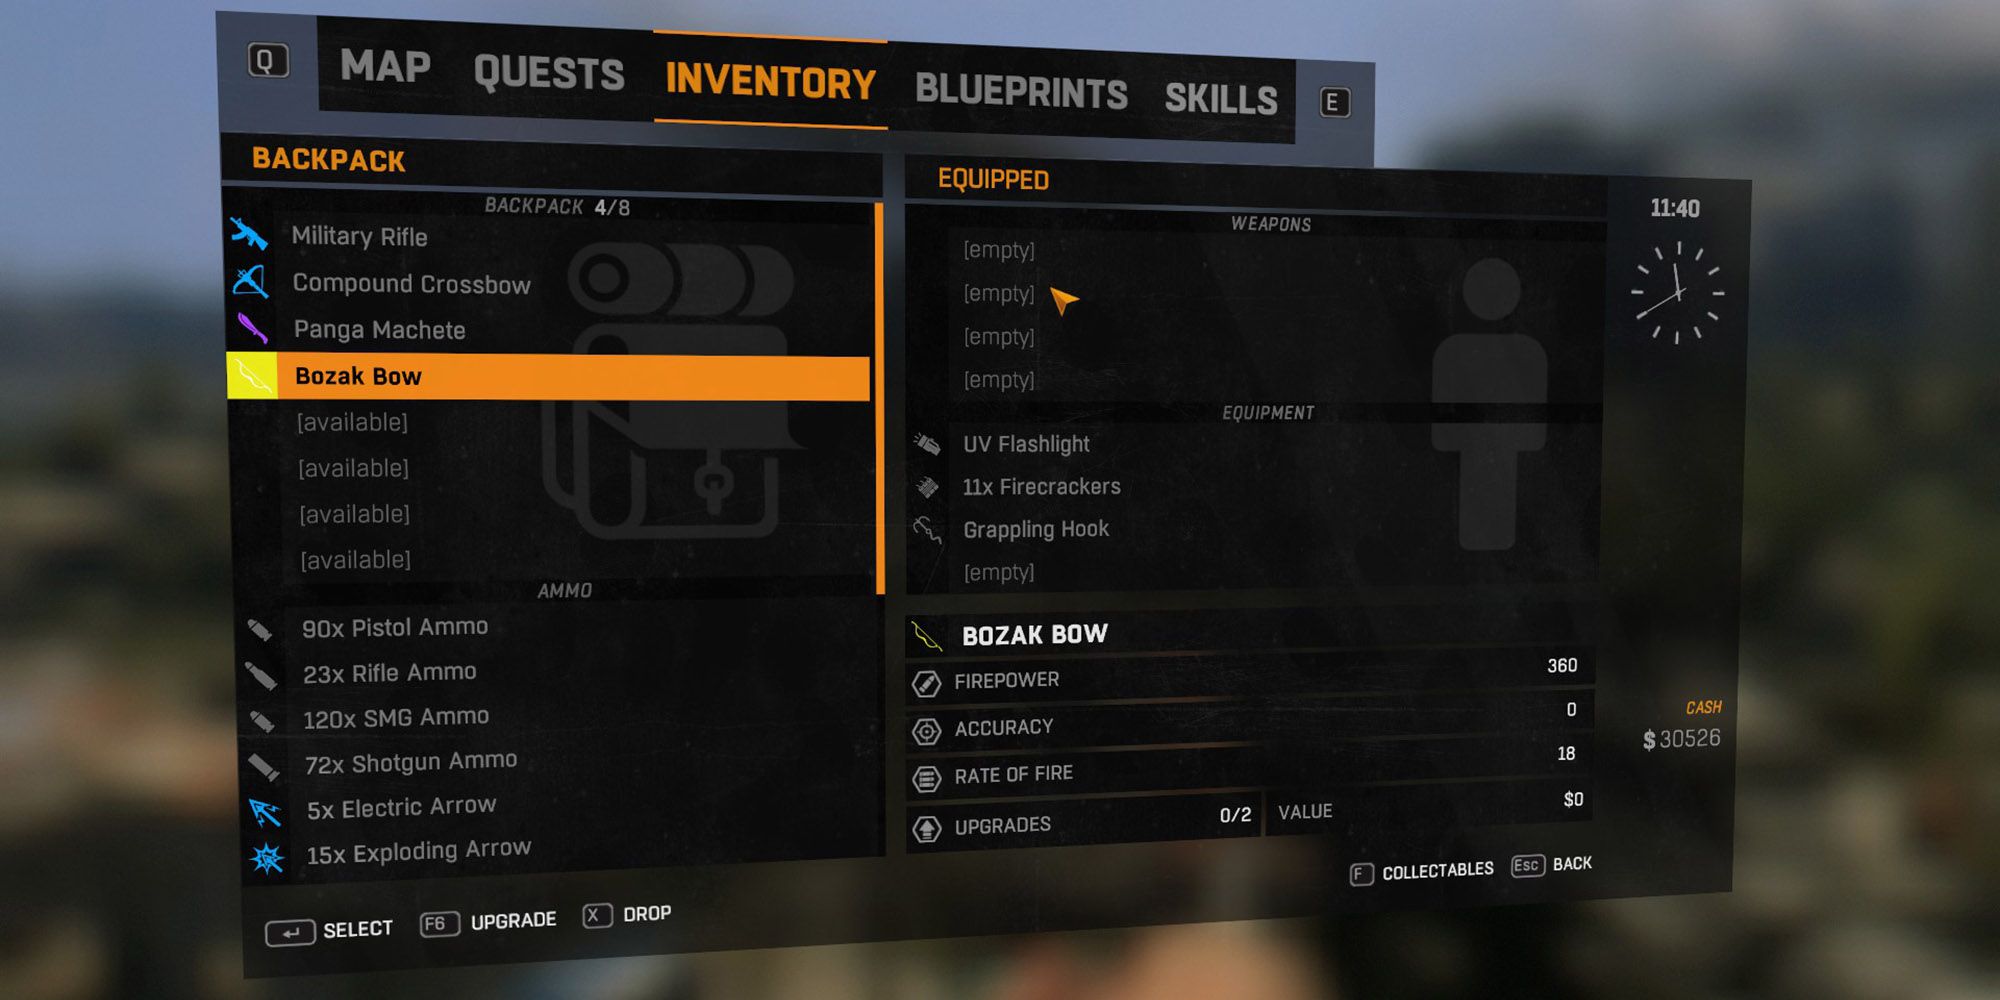 Dying Light 2's inventory